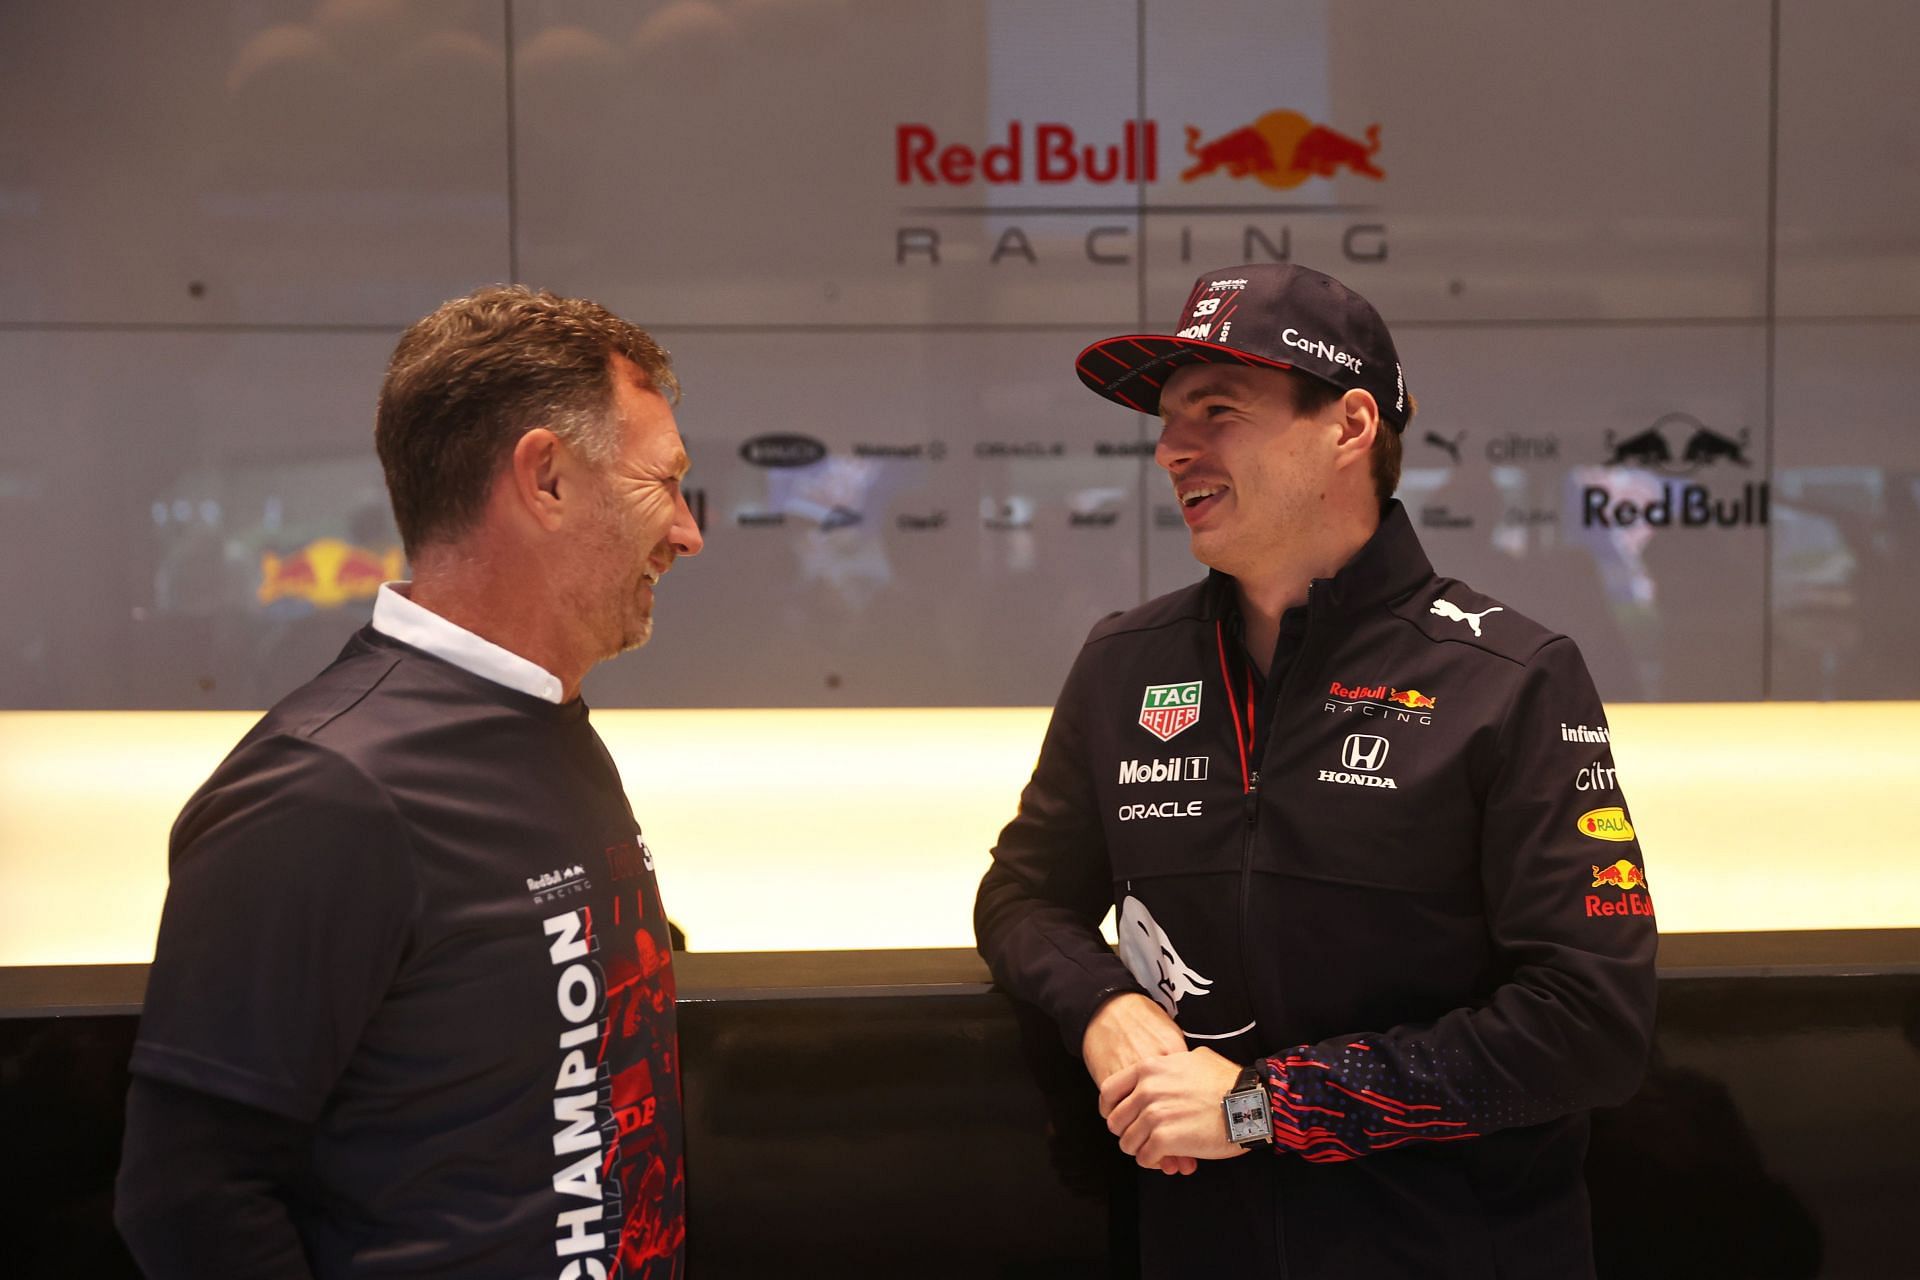 2021 F1 Drivers&#039; World Champion Max Verstappen talks with Red Bull Racing Team Principal Christian Horner at Red Bull Racing Factory in Milton Keynes, England. (Photo by Alex Pantling/Getty Images)